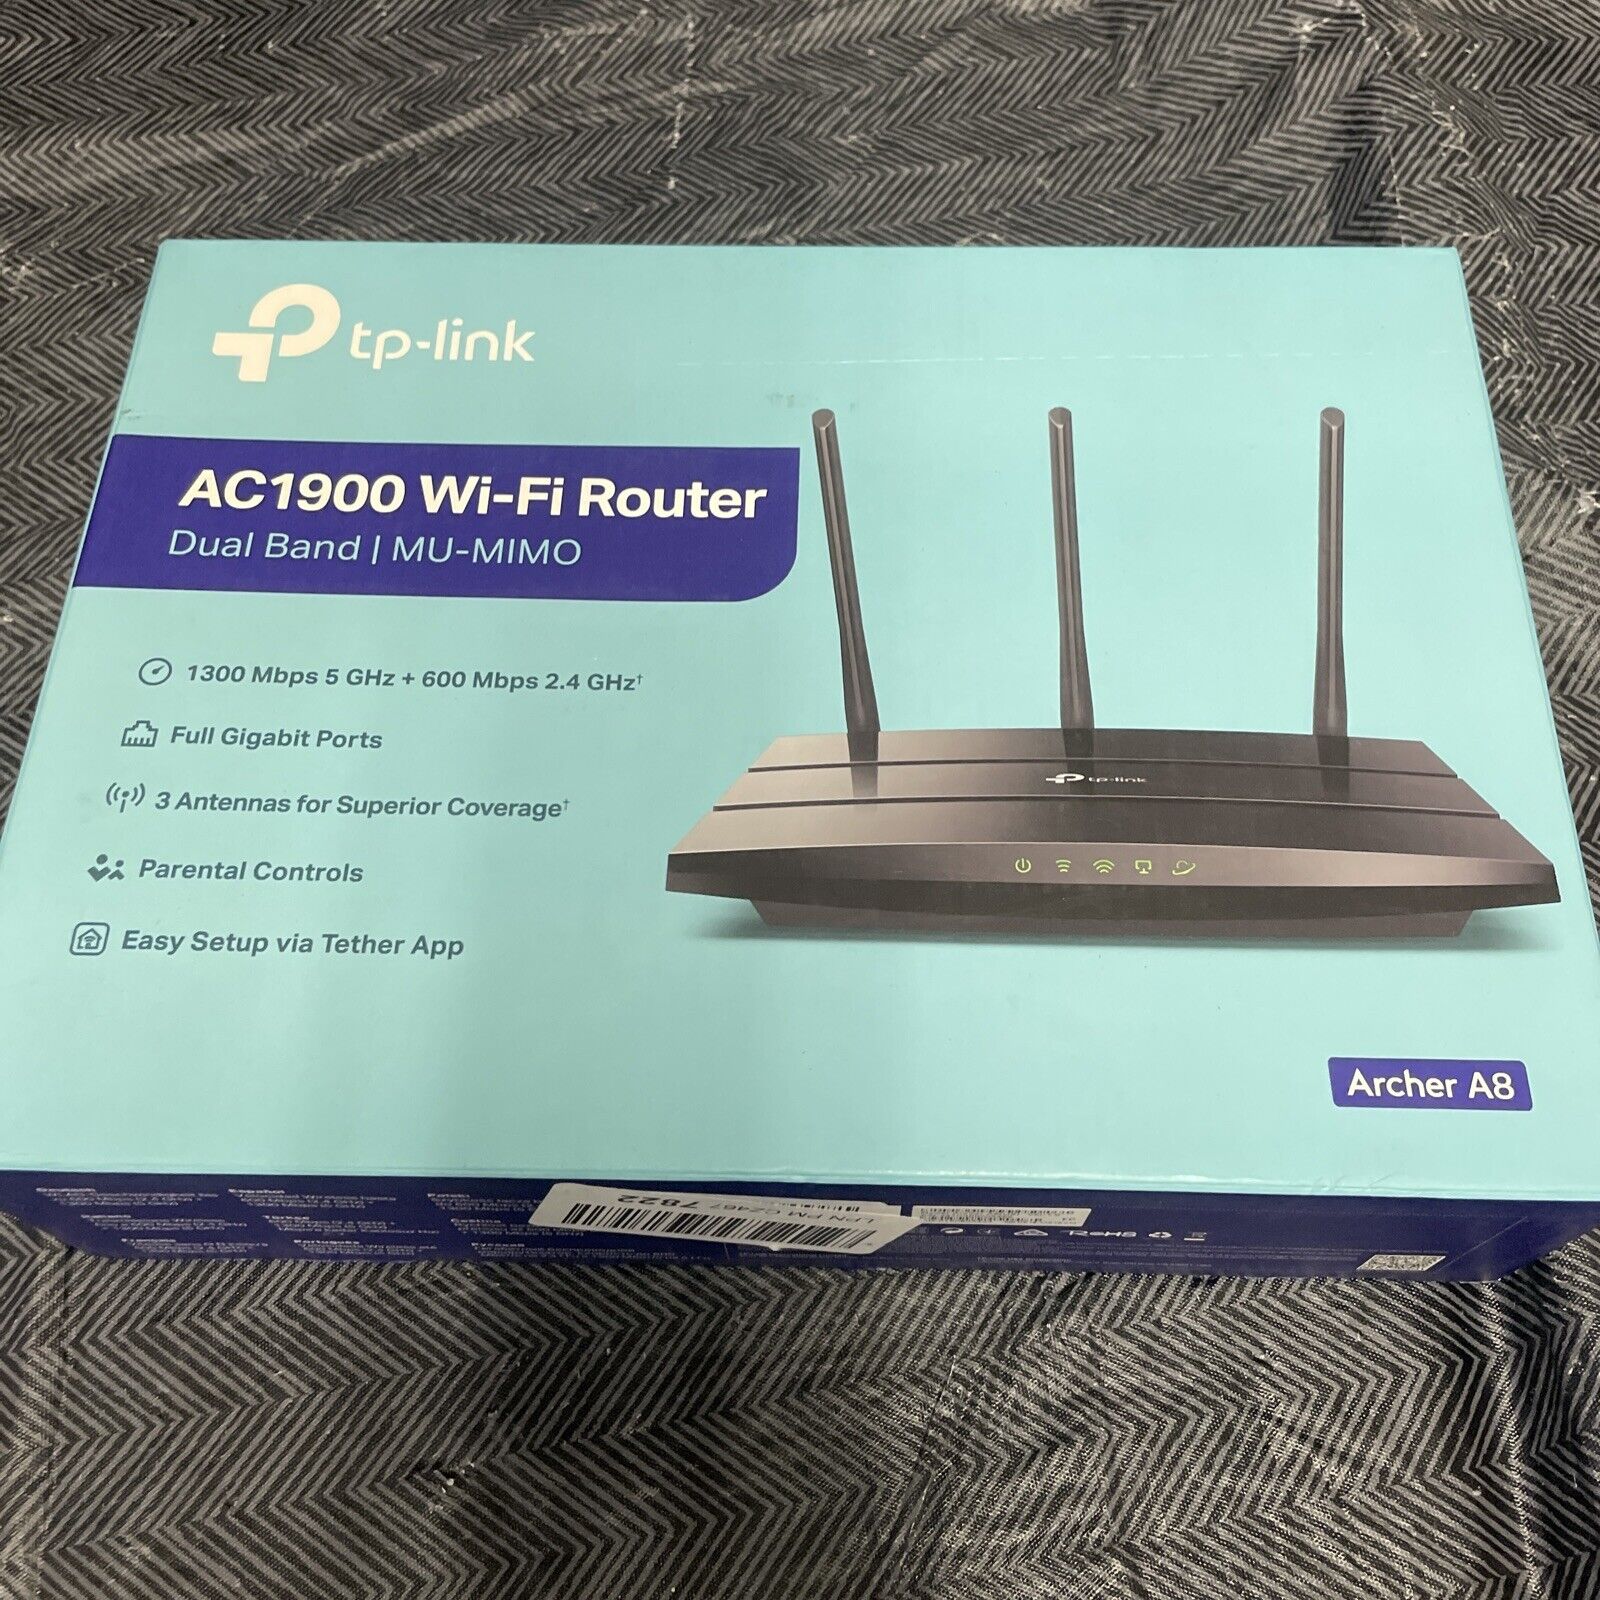 TP-Link - Archer C90 AC1900 Dual-Band MU-Mimo Wi-Fi Router 